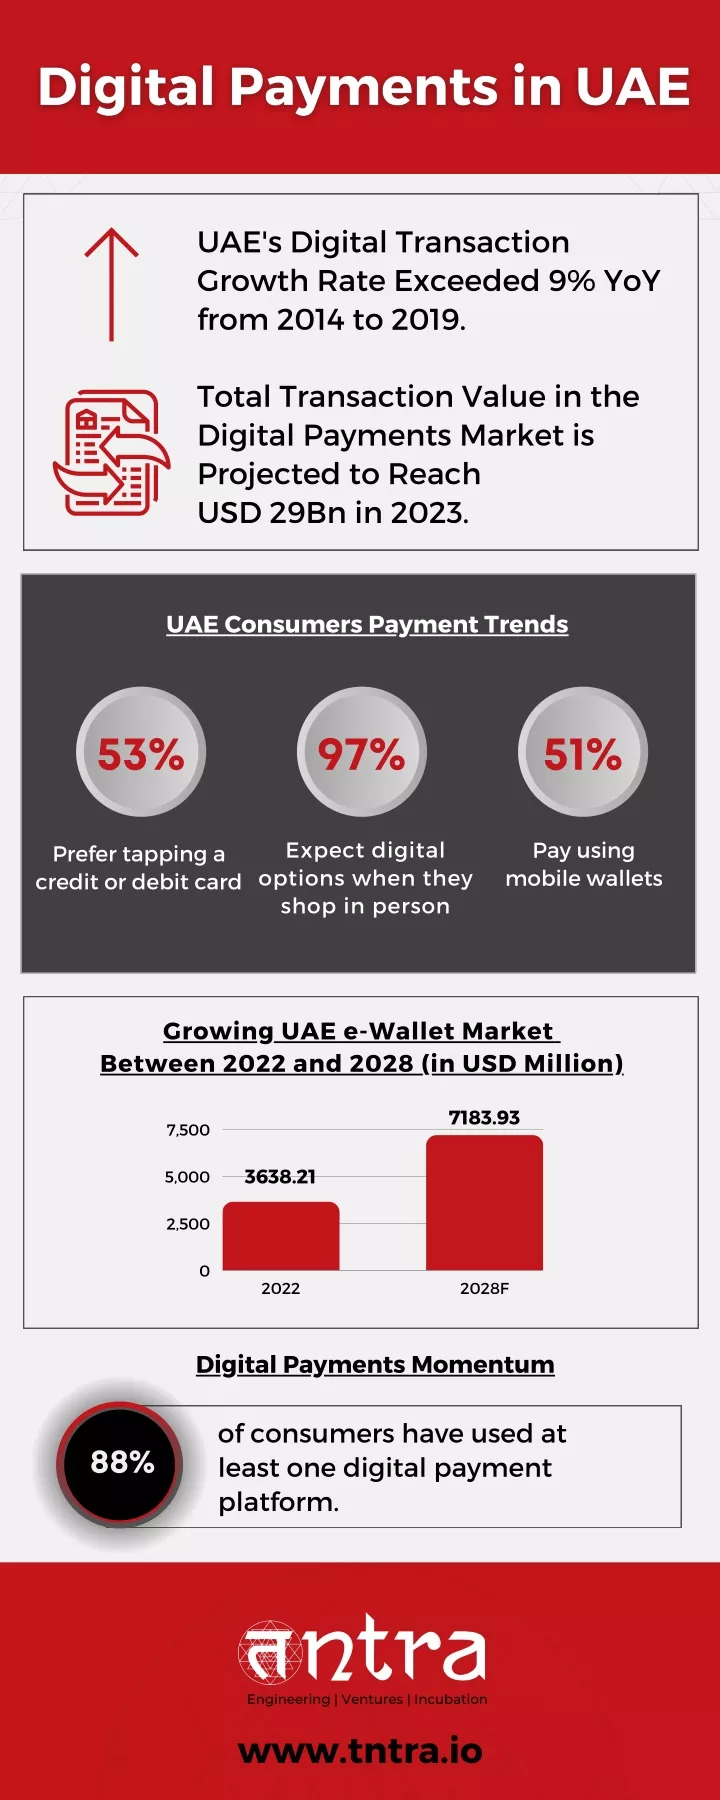 uae s digital transaction growth rate exceeded